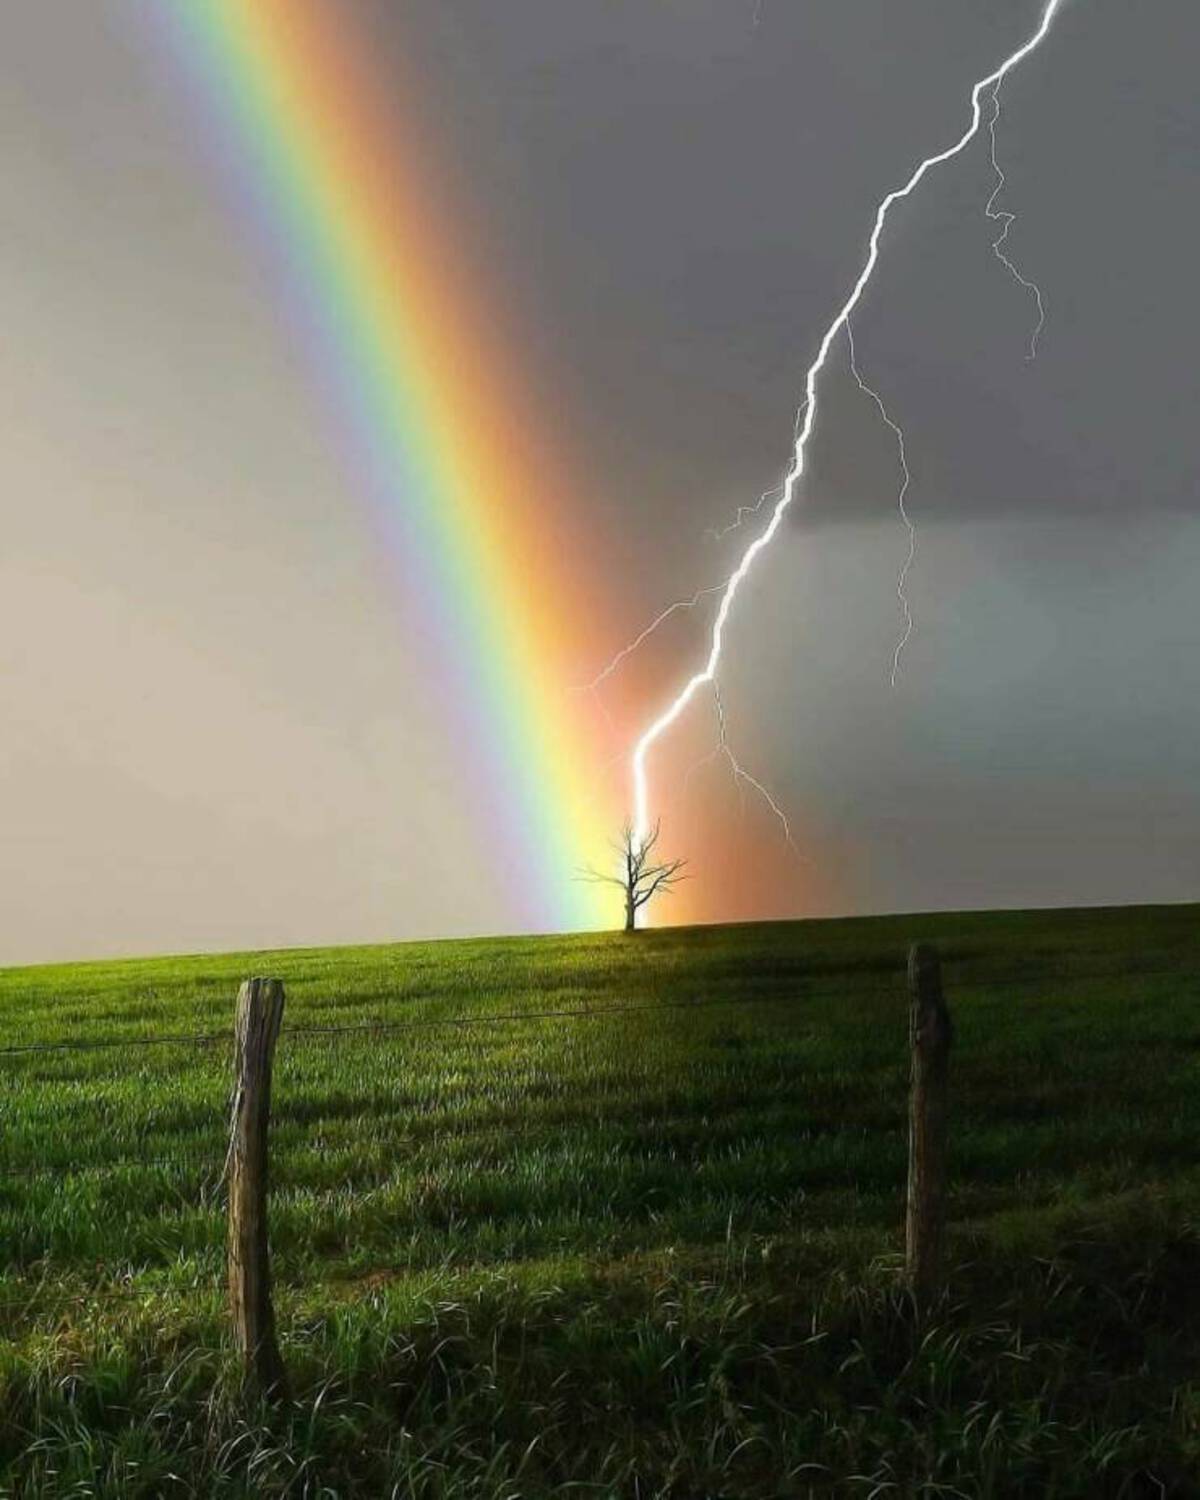 A rainbow behind a tree being struck by lightning.